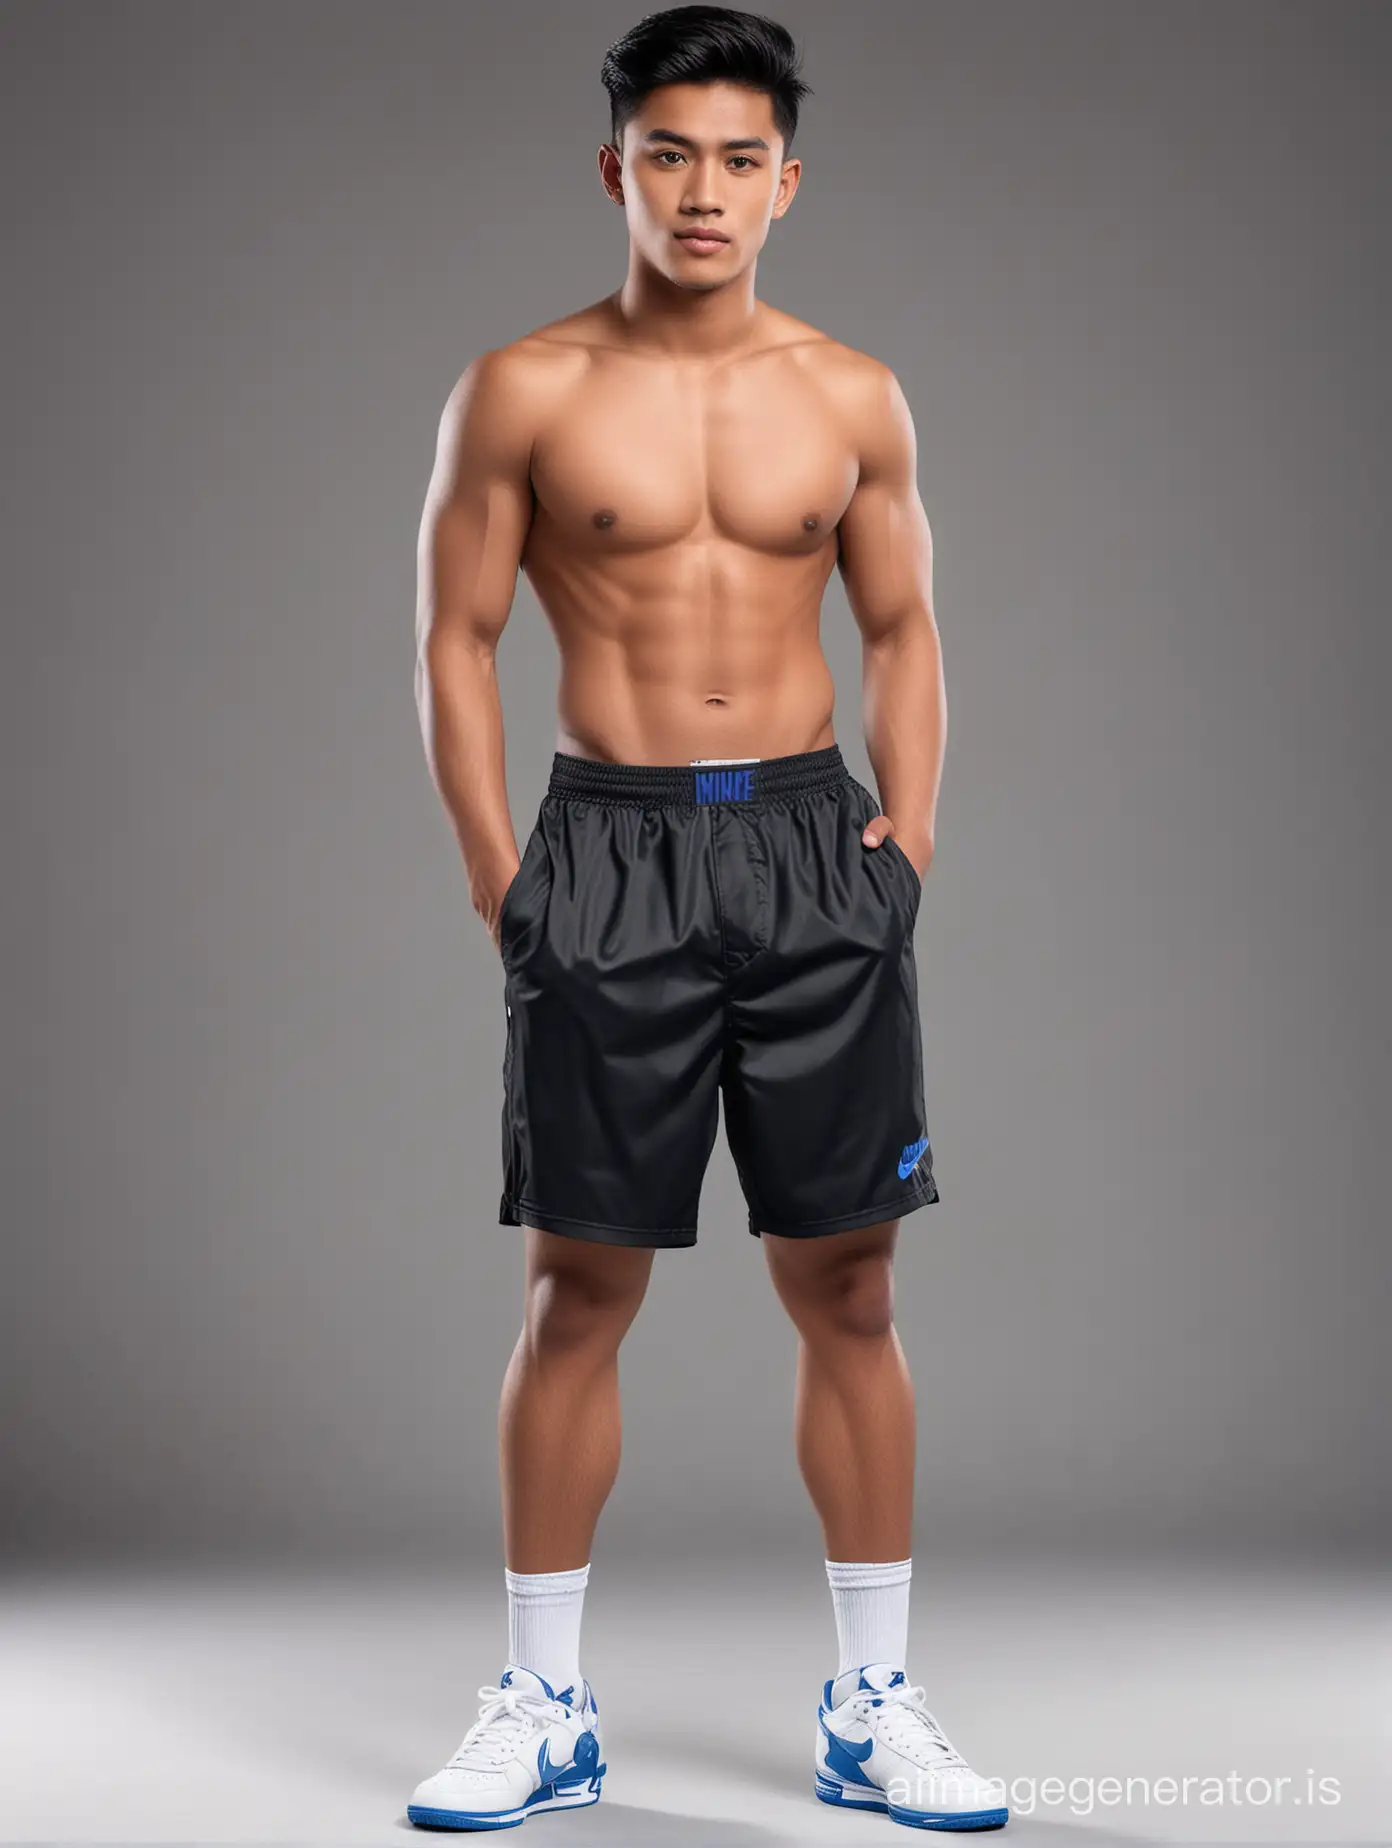 Handsome-Indonesian-Model-in-Renoma-Briefs-and-Nike-Shoes